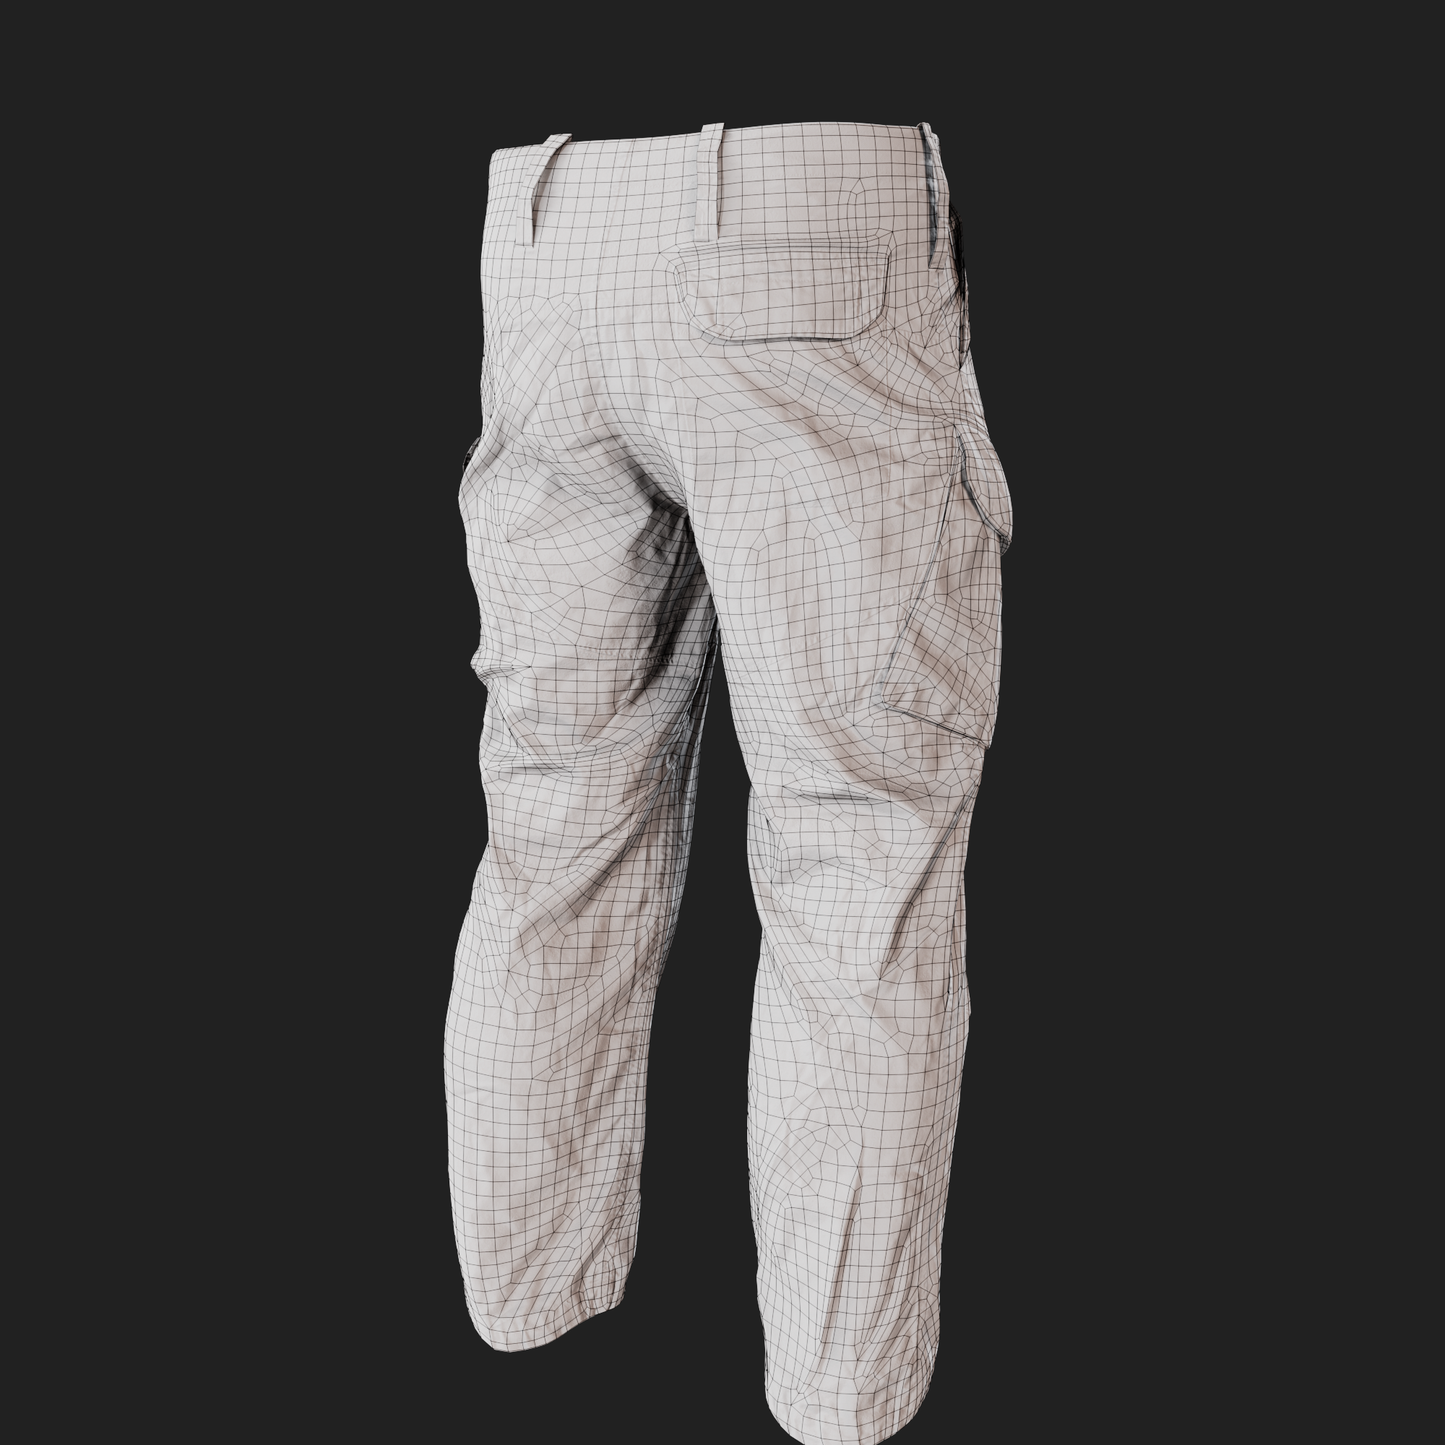 UK Military Trousers